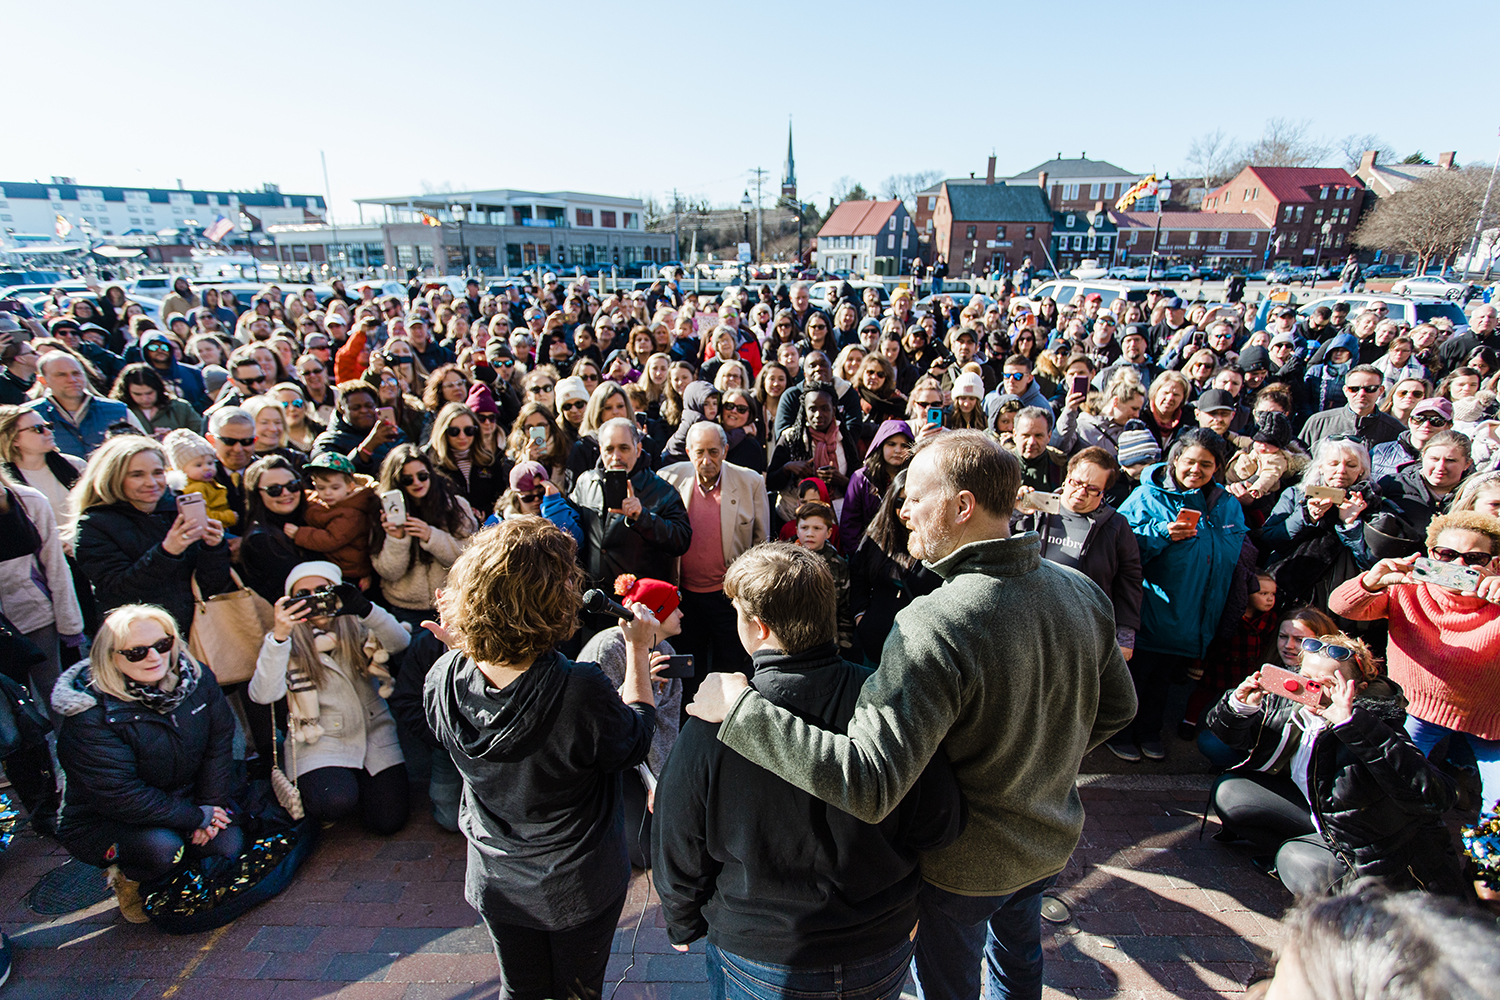 On a sunny day, Amy, Beau, and Ben Wright face a crowd on a street. Amy holds a microphone and Beau and Ben turn slightly toward her. The crowd is engaged, some holding up smartphones with cameras facing the Wrights. Many people wear warm clothing.